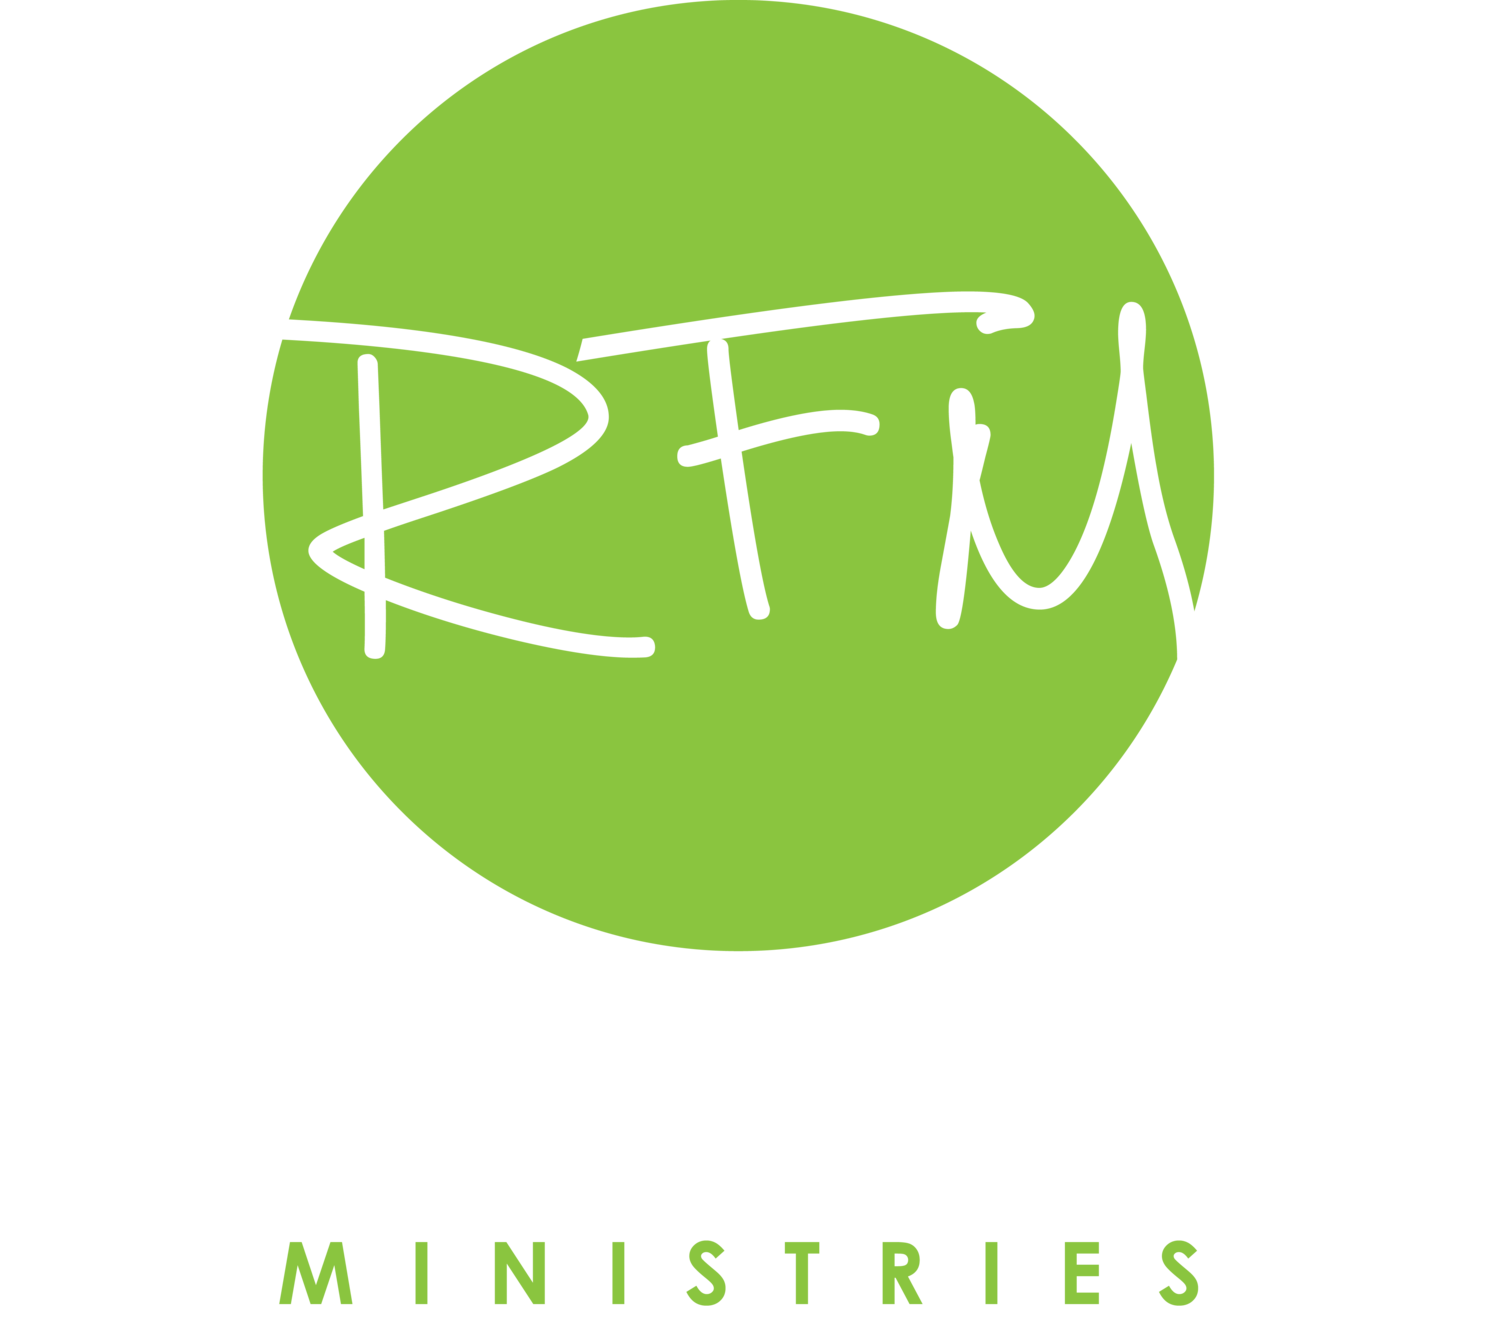 REVIVAL FIRE MINISTRIES